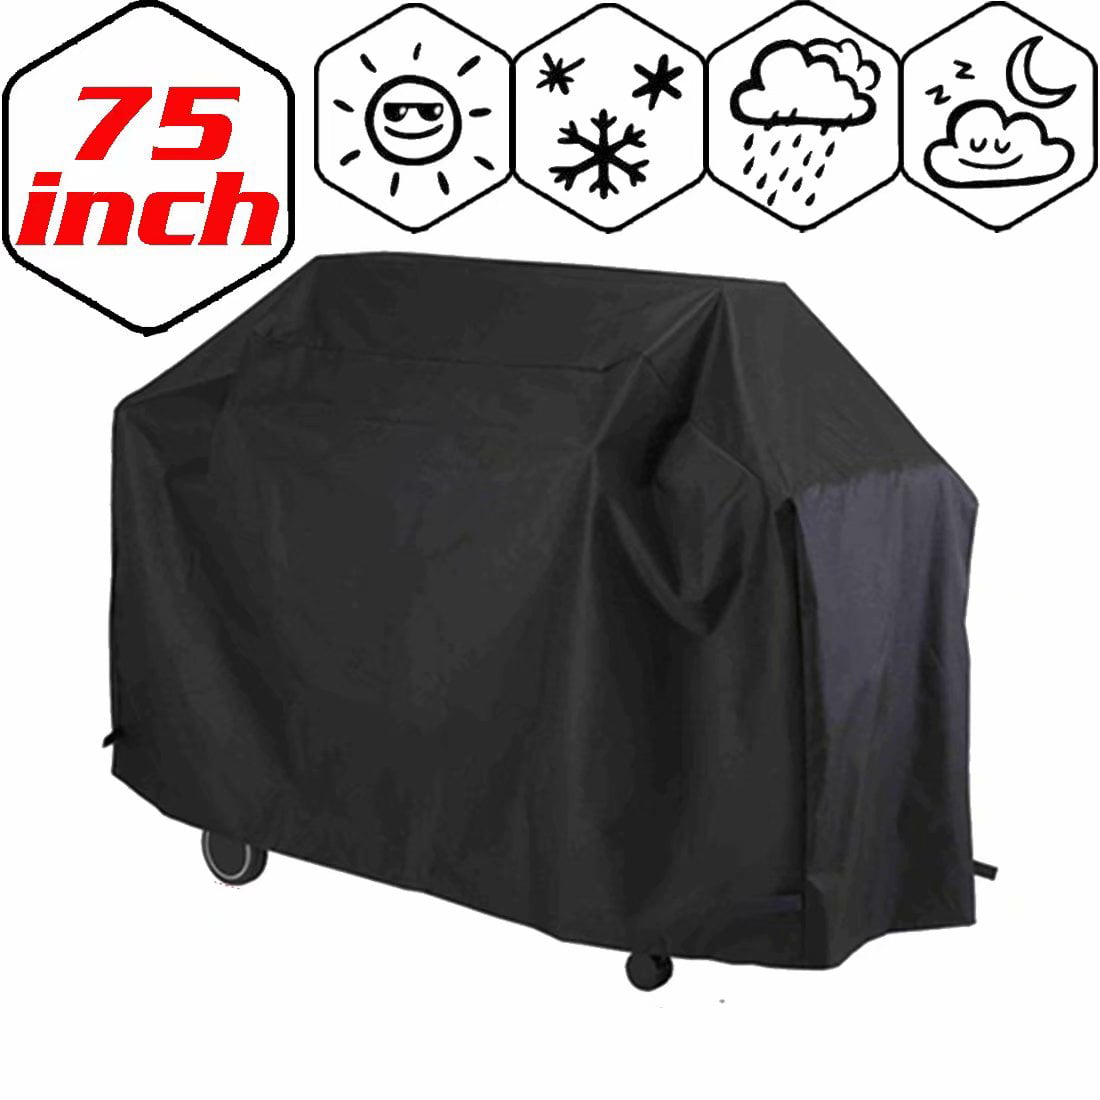 75" BBQ Grill Cover Outdoor Barbecue Protector with Storage Bag Heavy Duty,UV Protected, Wind